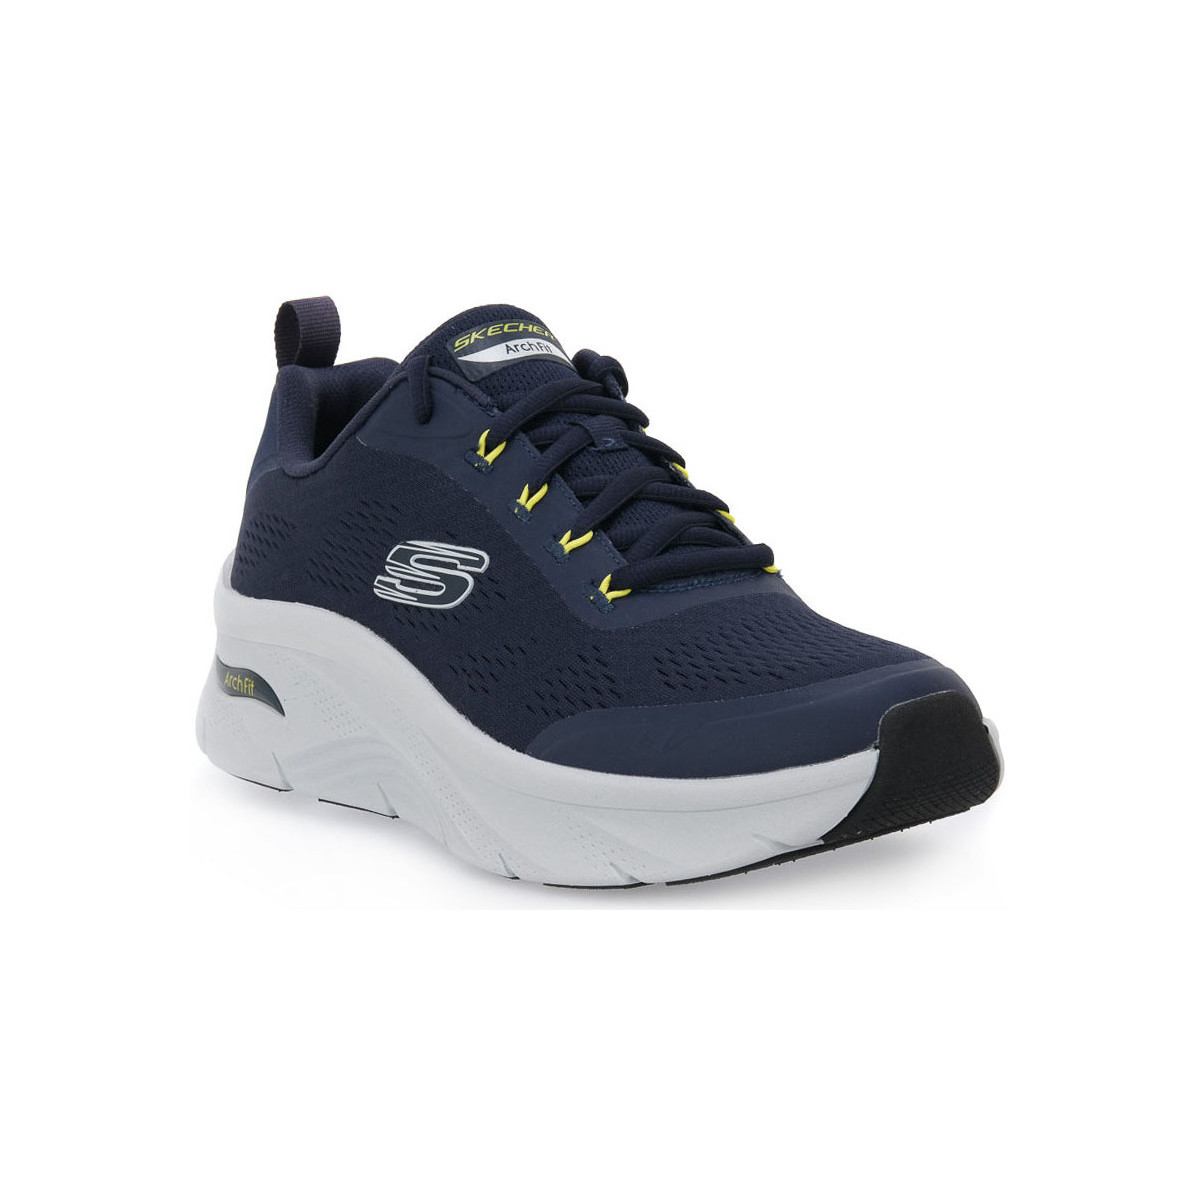 Chaussures Homme Running / trail Skechers NVLM ARCH FIT Bleu